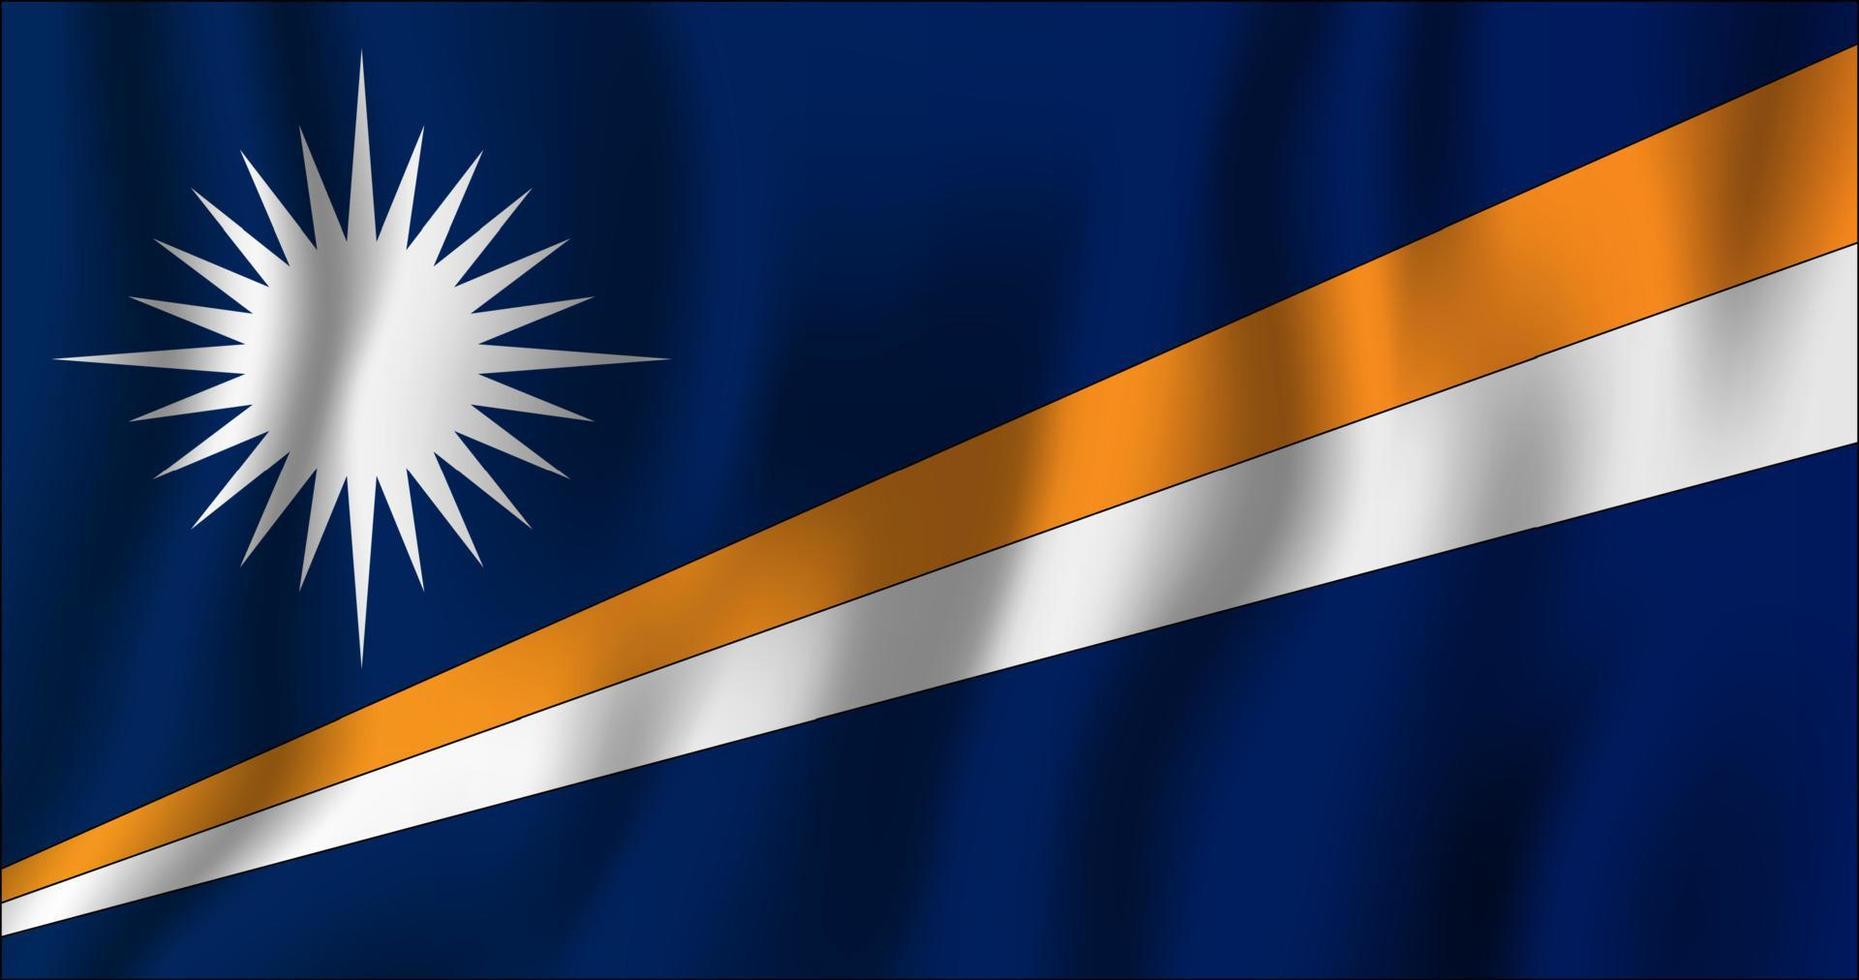 Marshall Islands realistic waving flag vector illustration. National country background symbol. Independence day